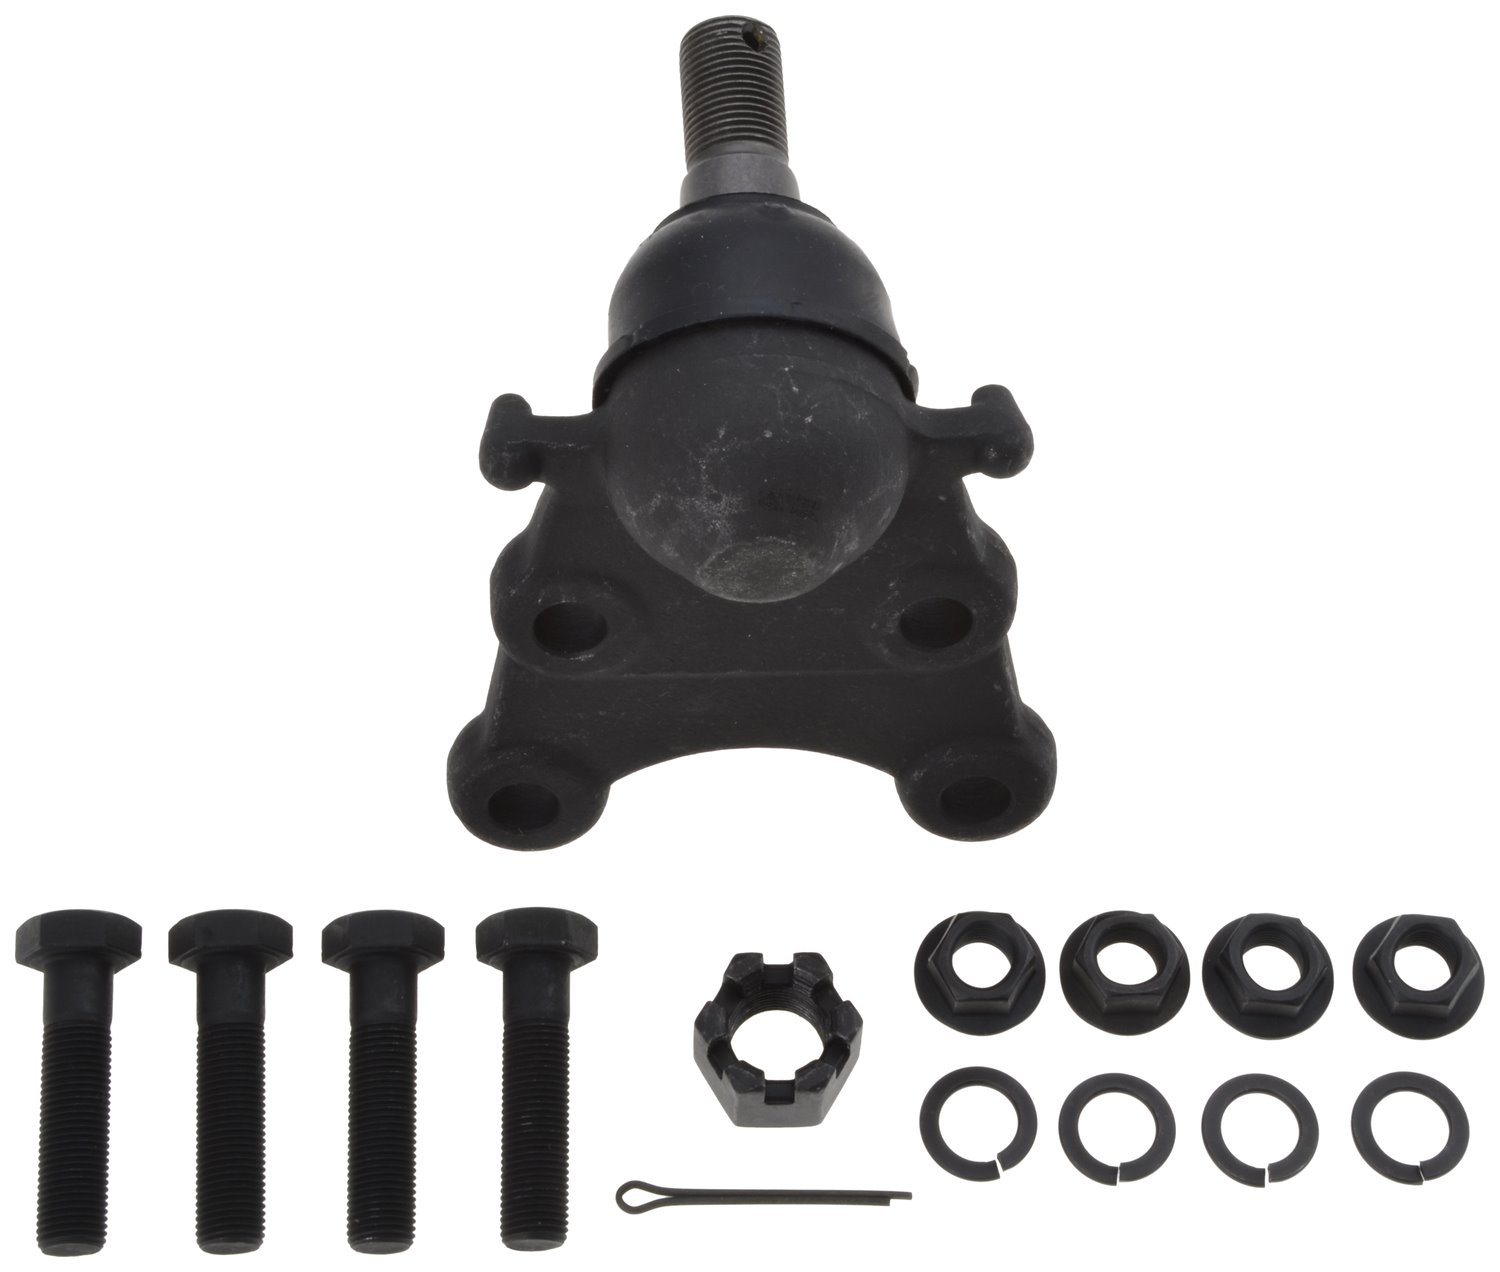 JBJ955 Ball Joint Fits Select GM Models, Position: Left/Driver or Right/Passenger, Front Lower